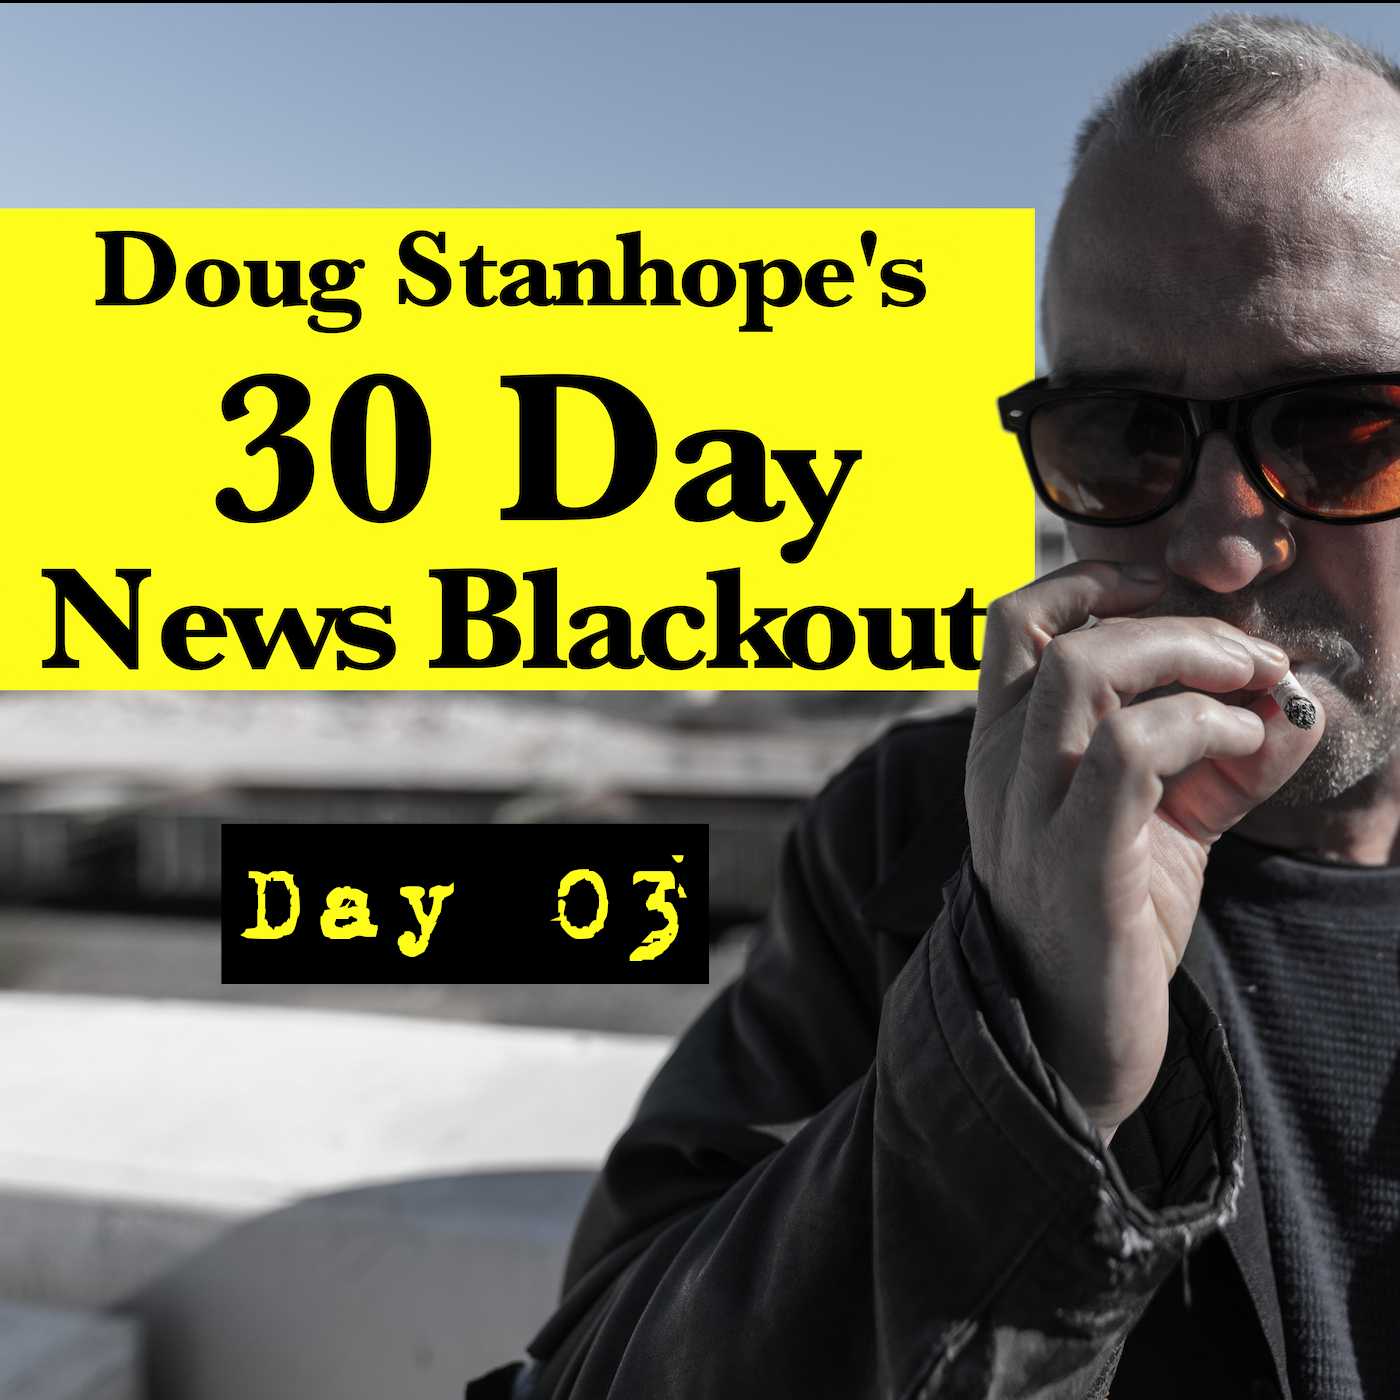 Ep.#366: Day 03 - Stanhope’s 30 Day News Blackout